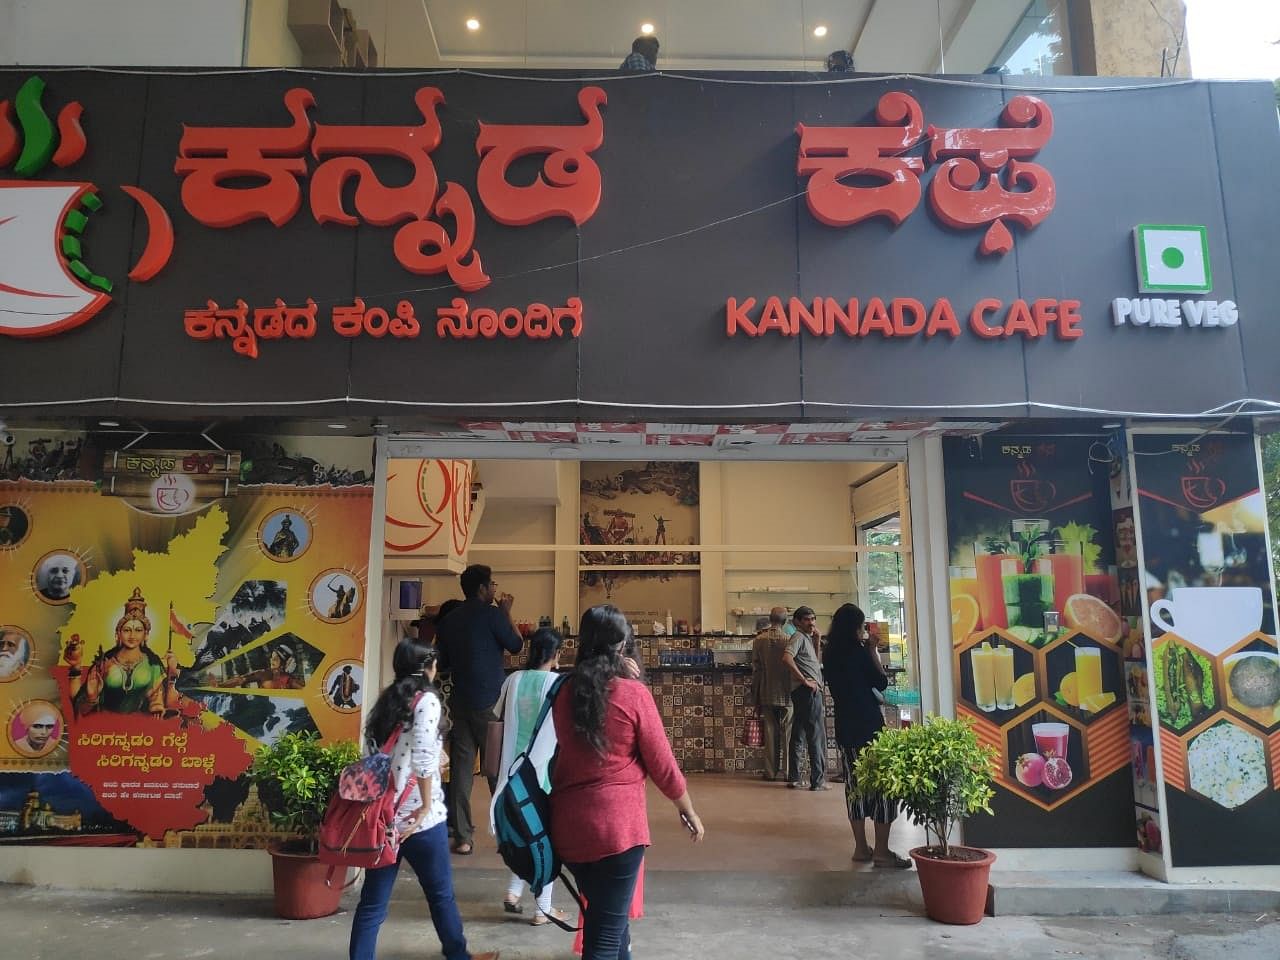 Kannada Cafe, started just a month ago has families coming in all the way from Whitefield.